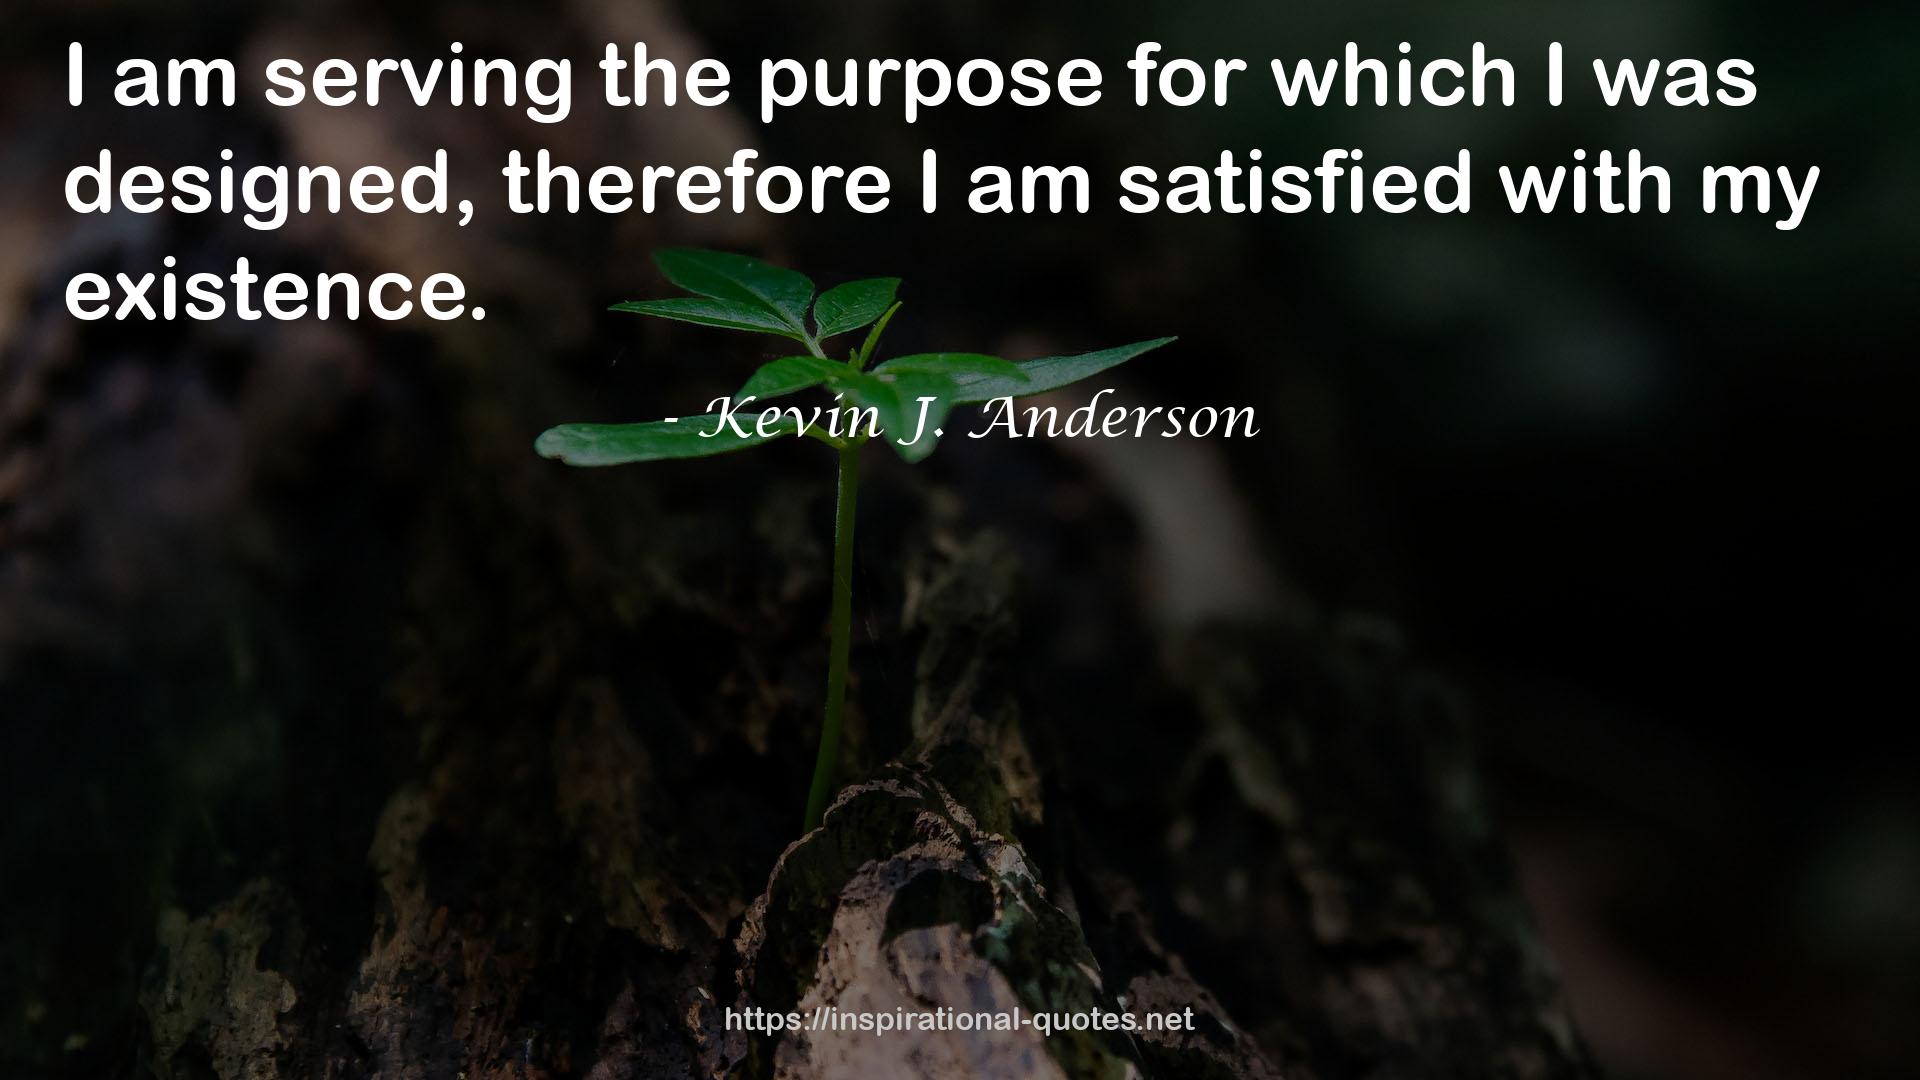 Kevin J. Anderson QUOTES